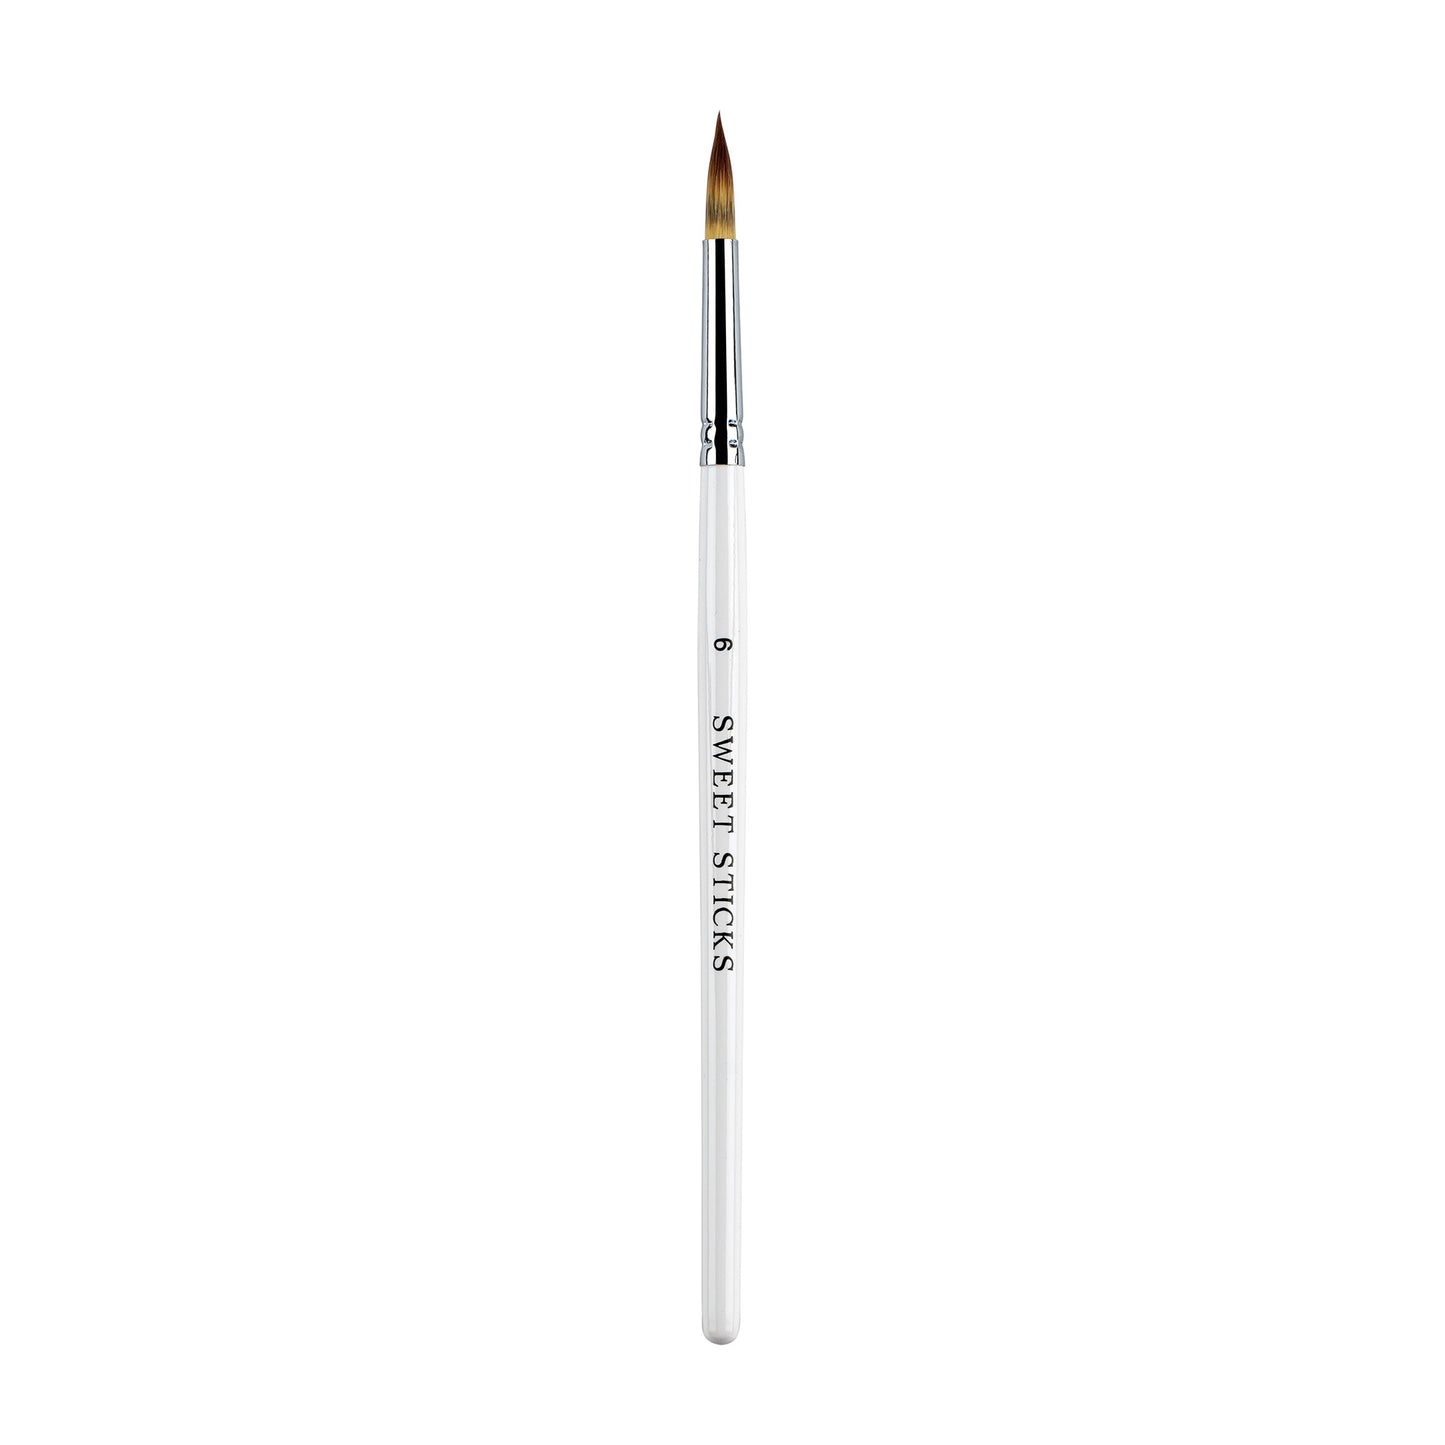 White Pointed Round Paint BRUSH No 6 by Sweet Sticks